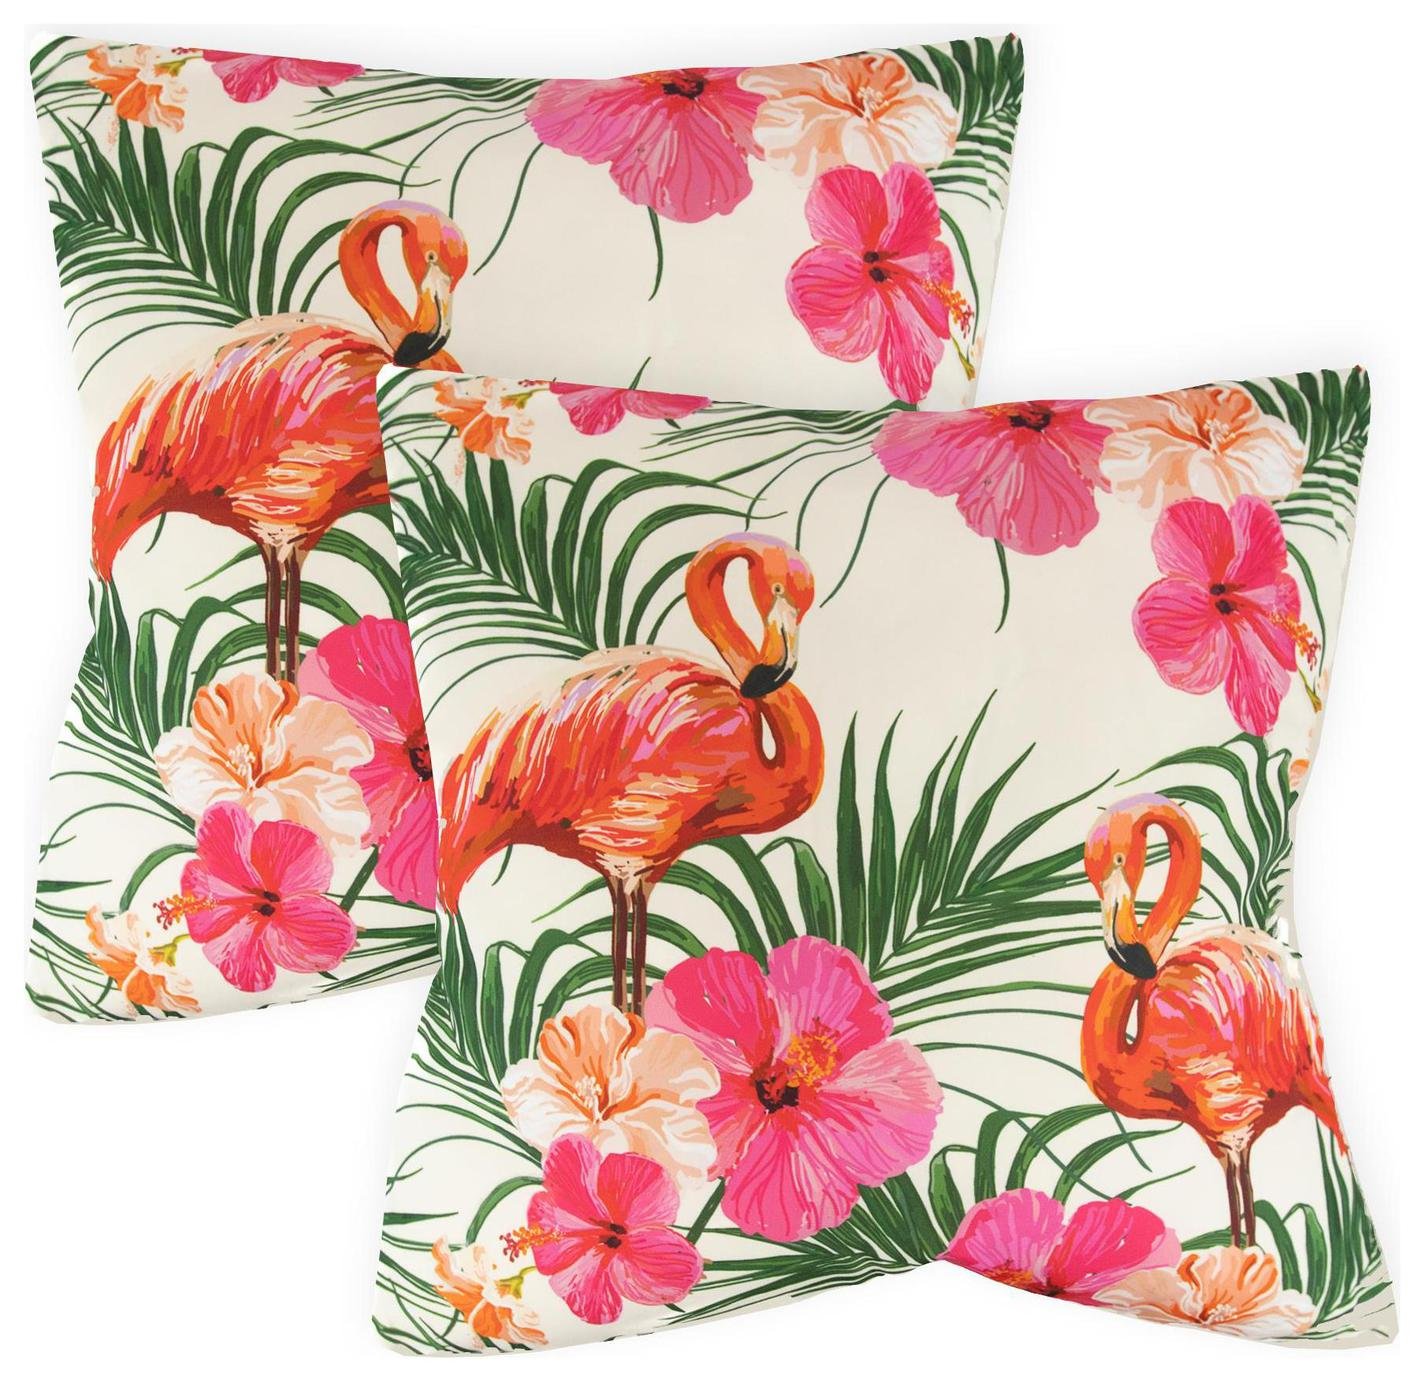 Streetwize Flamingo Print Outdoor Cushion - Pack of 4